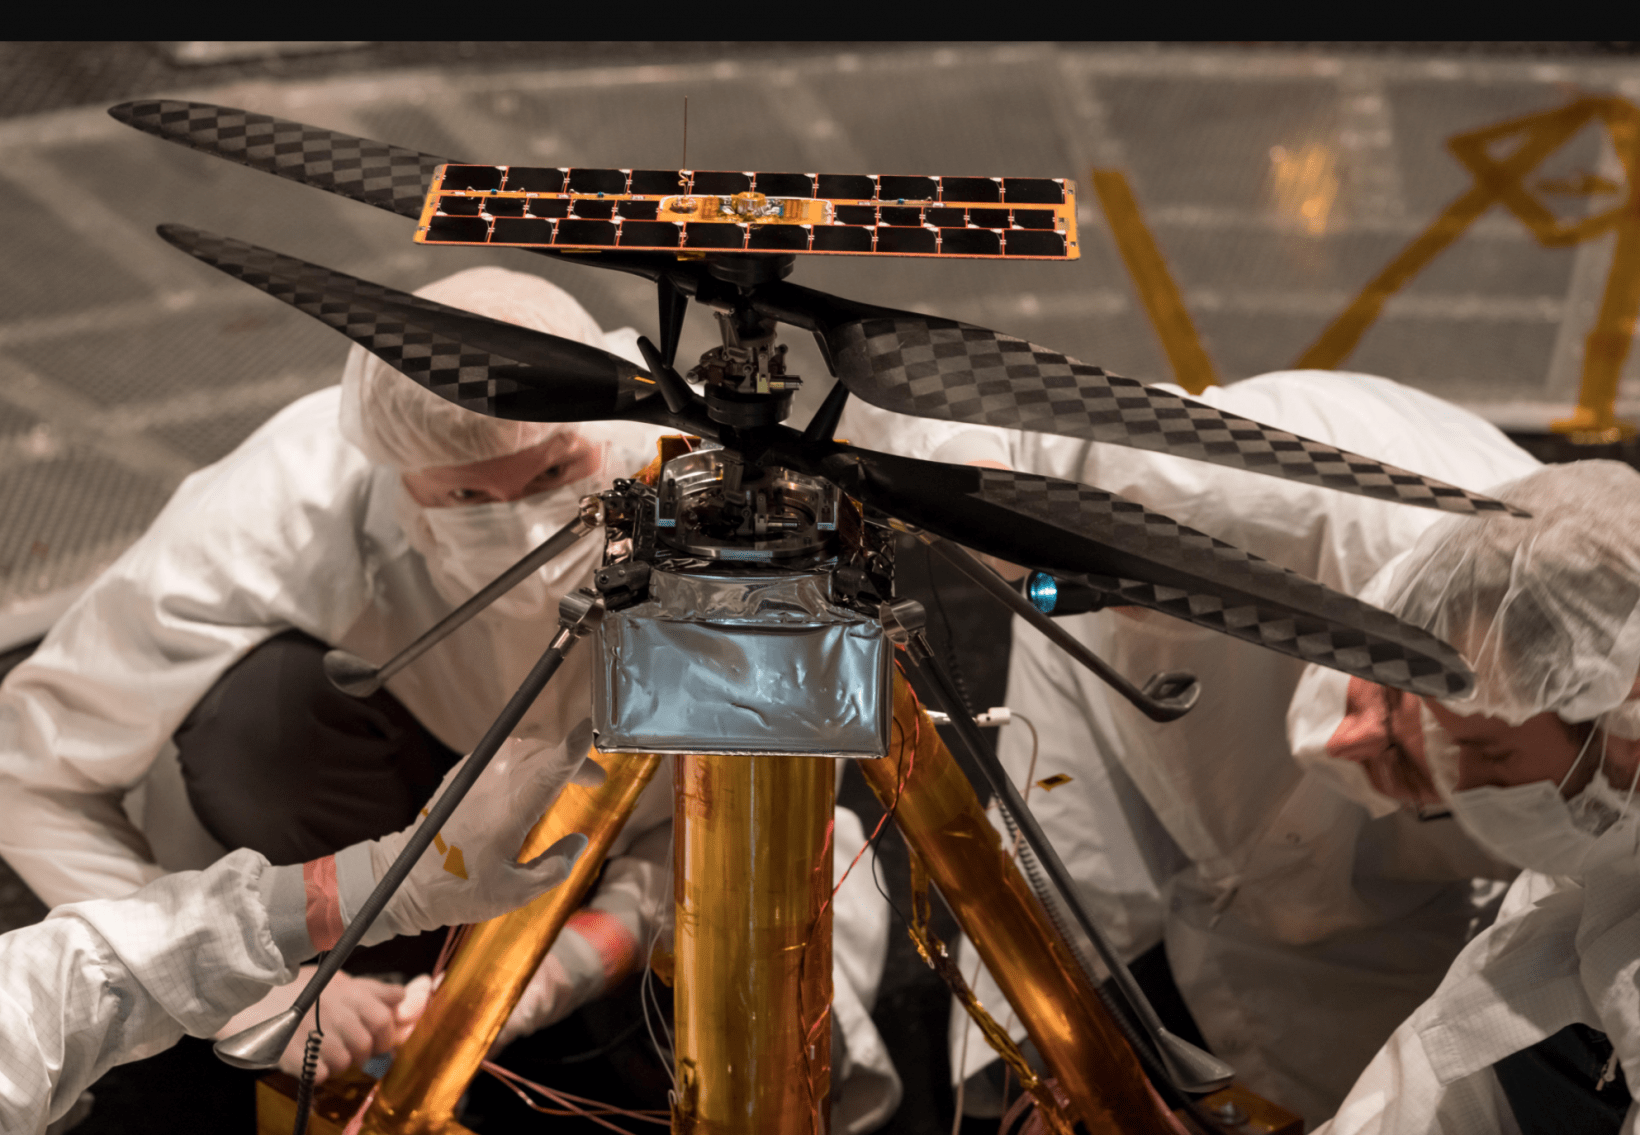 Ingenuity will attempt up to five test flights on Mars